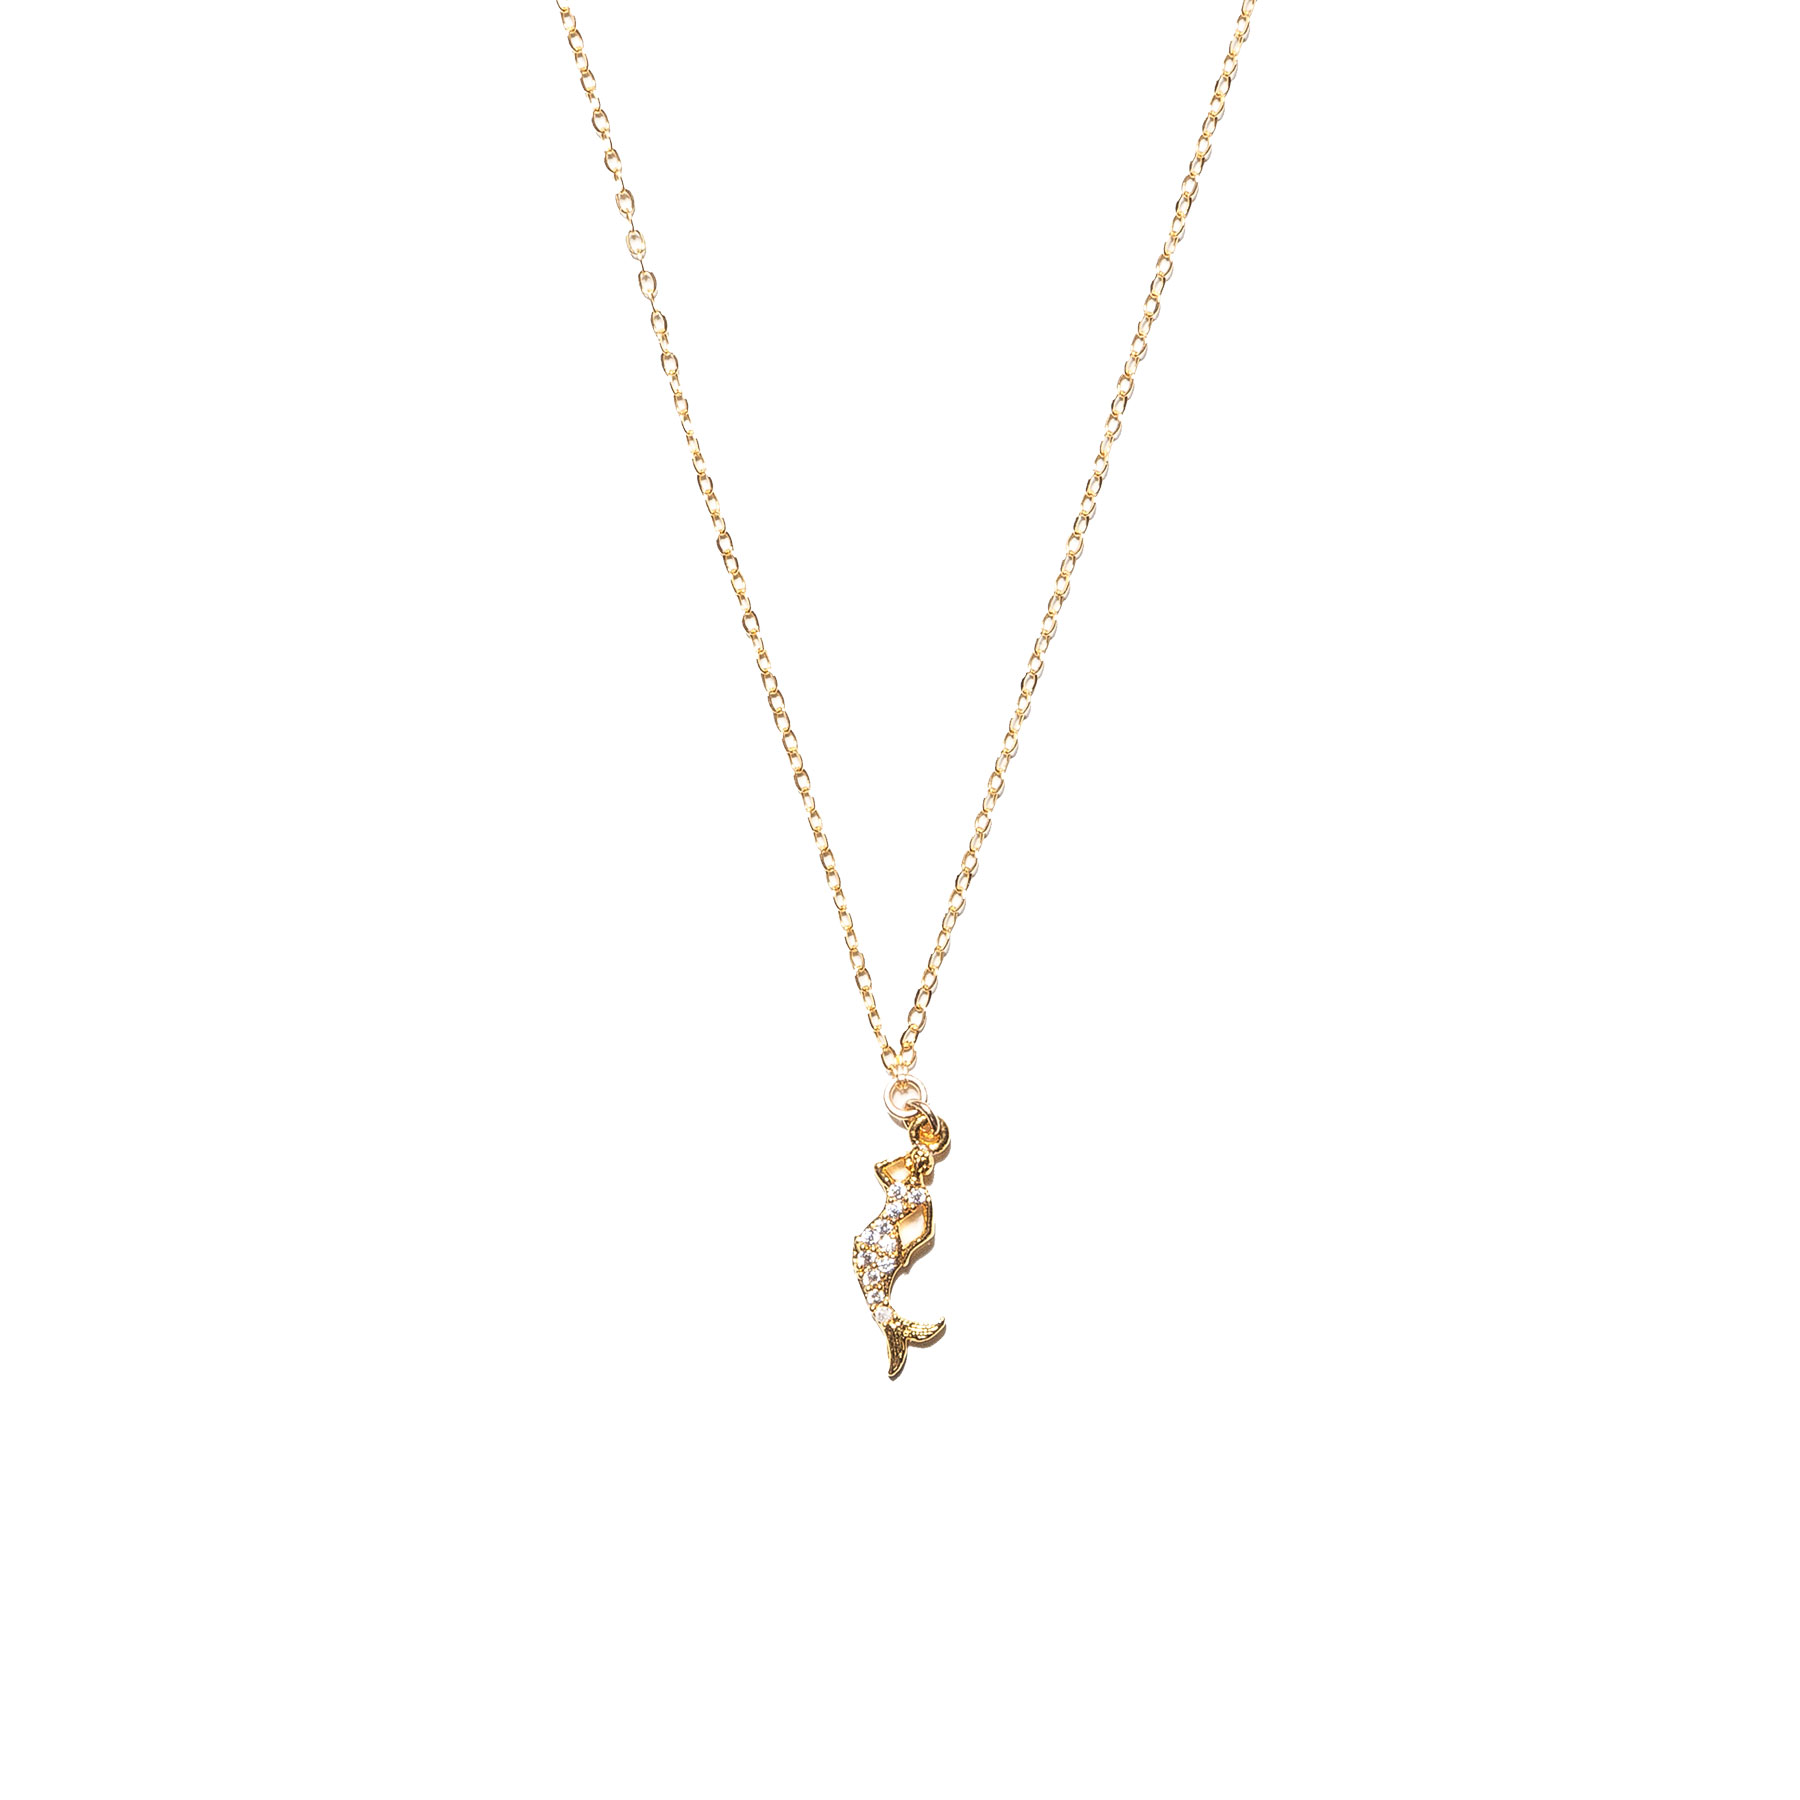 Disney's The Little Mermaid 18k Gold Plated Charm Necklace